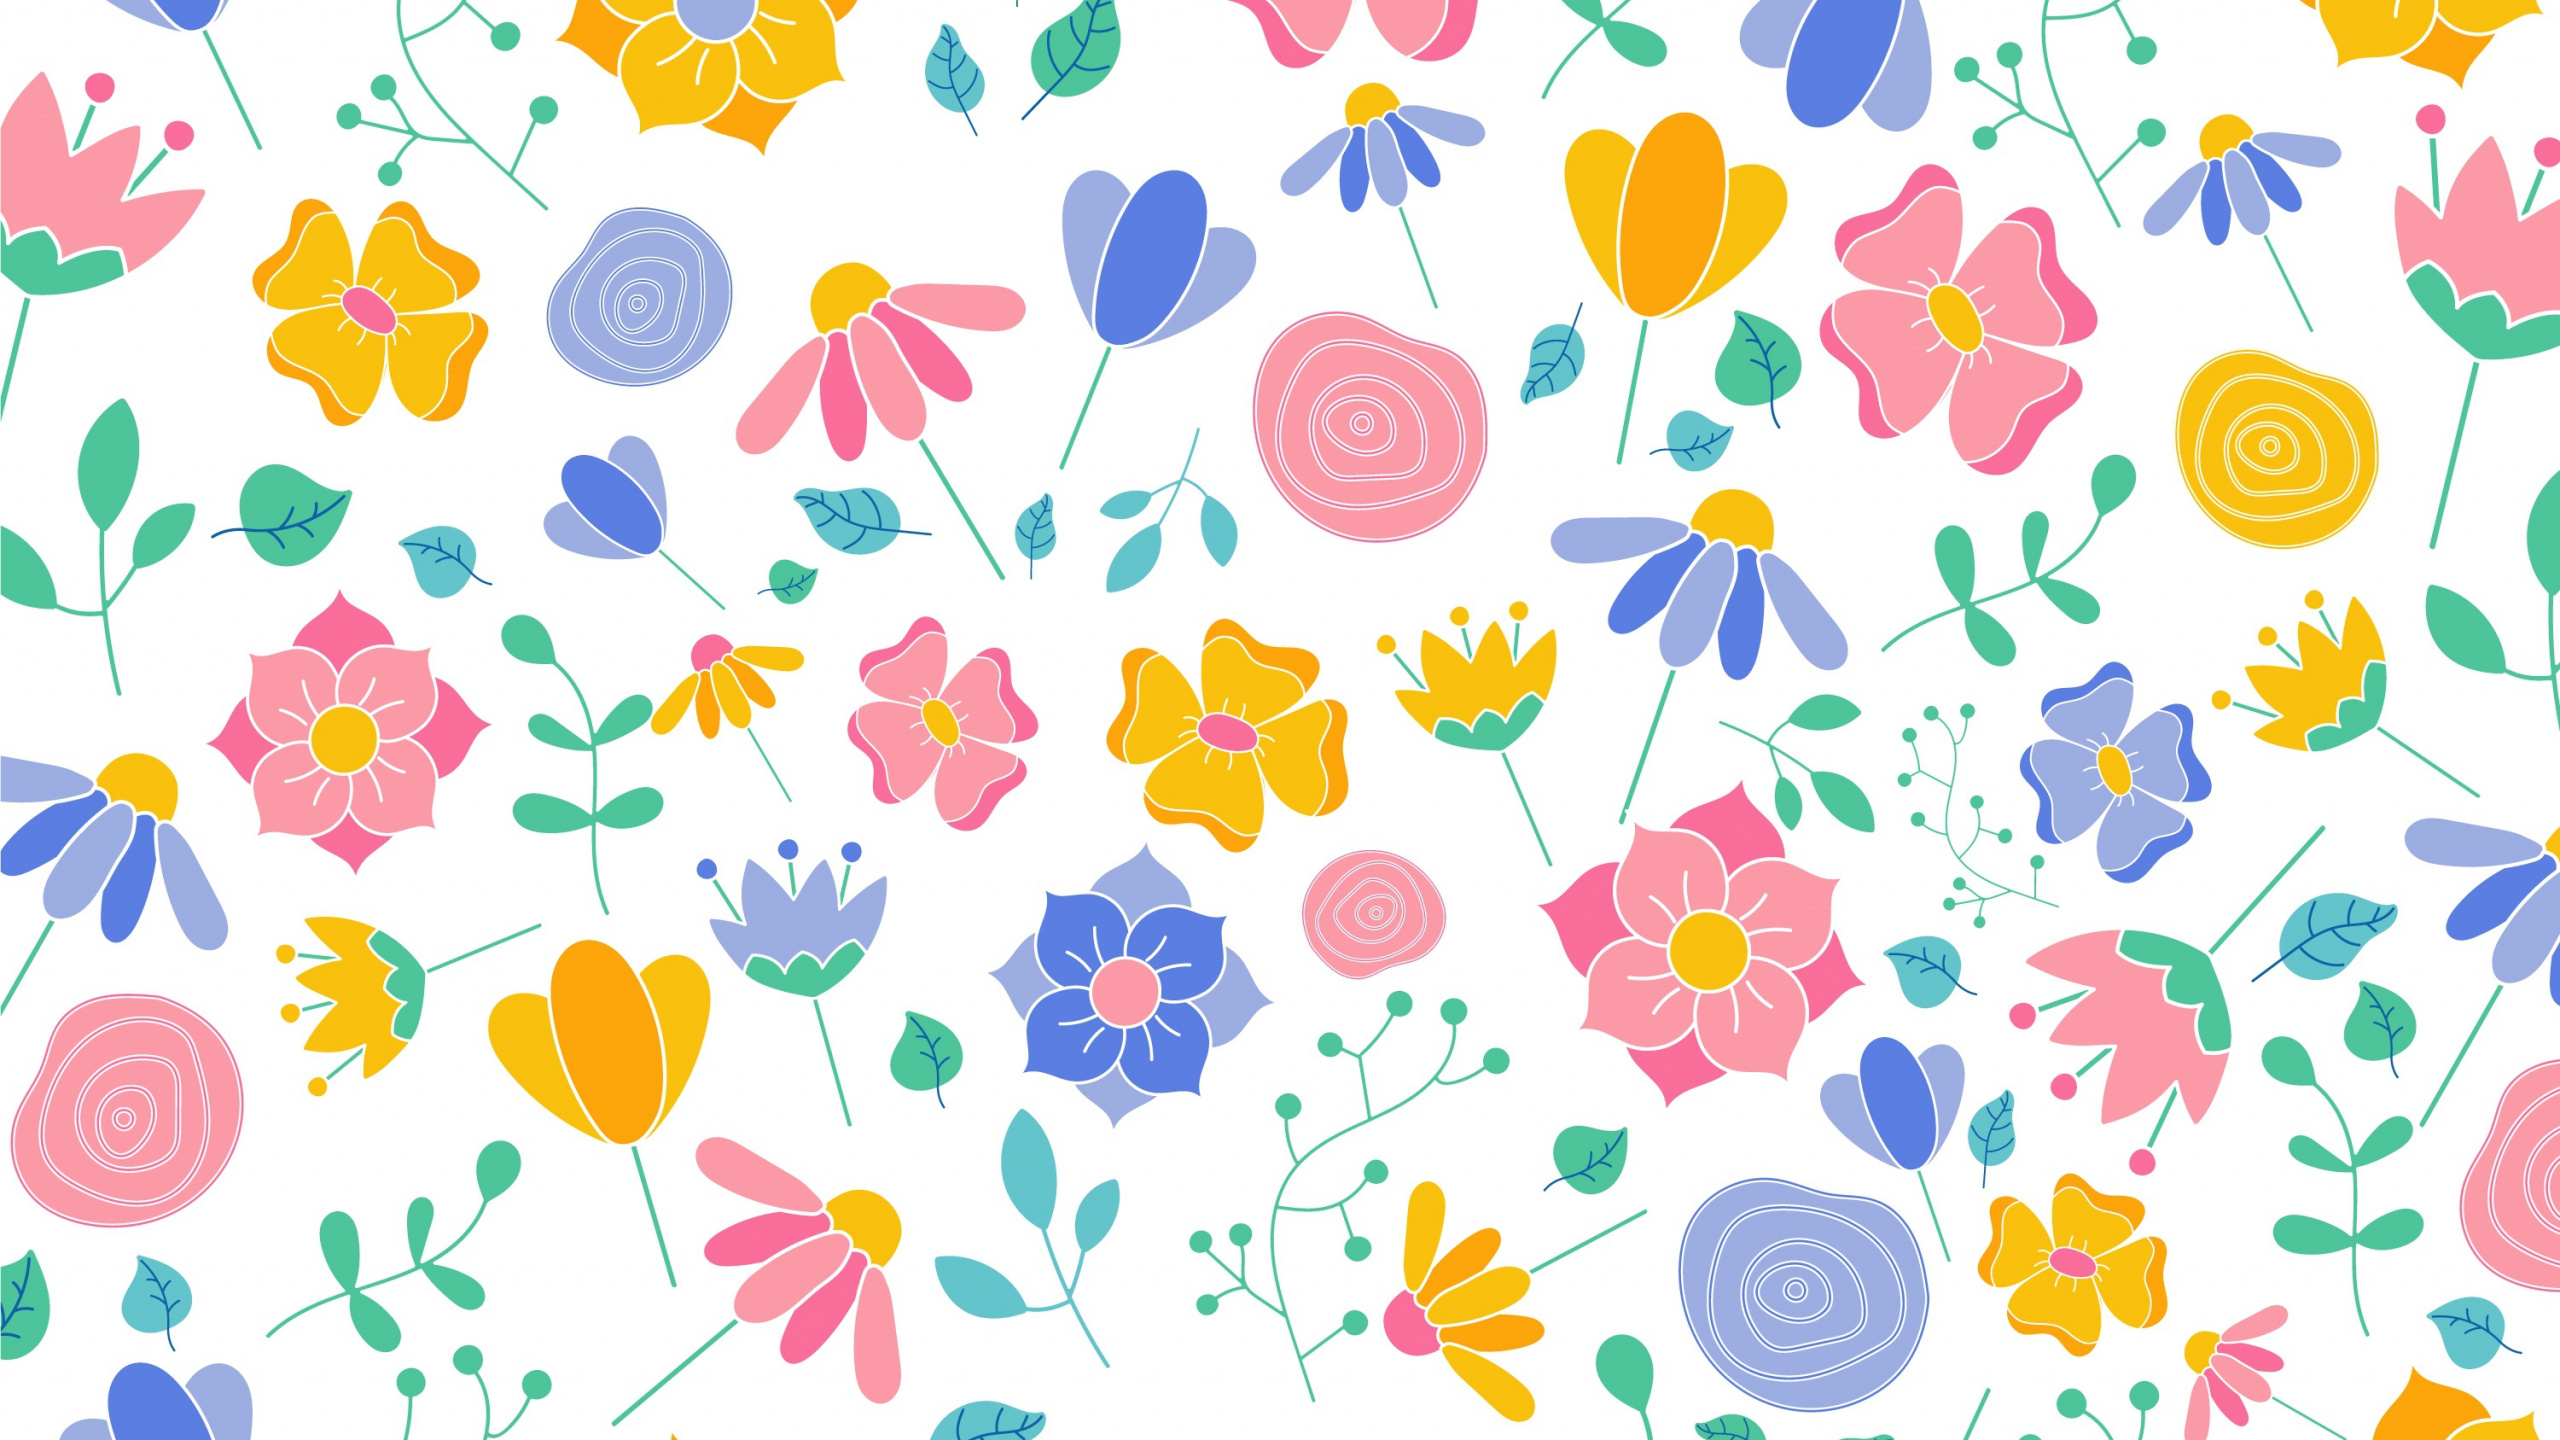 Pink Yellow and Blue Floral Illustration. Wallpaper in 2560x1440 Resolution